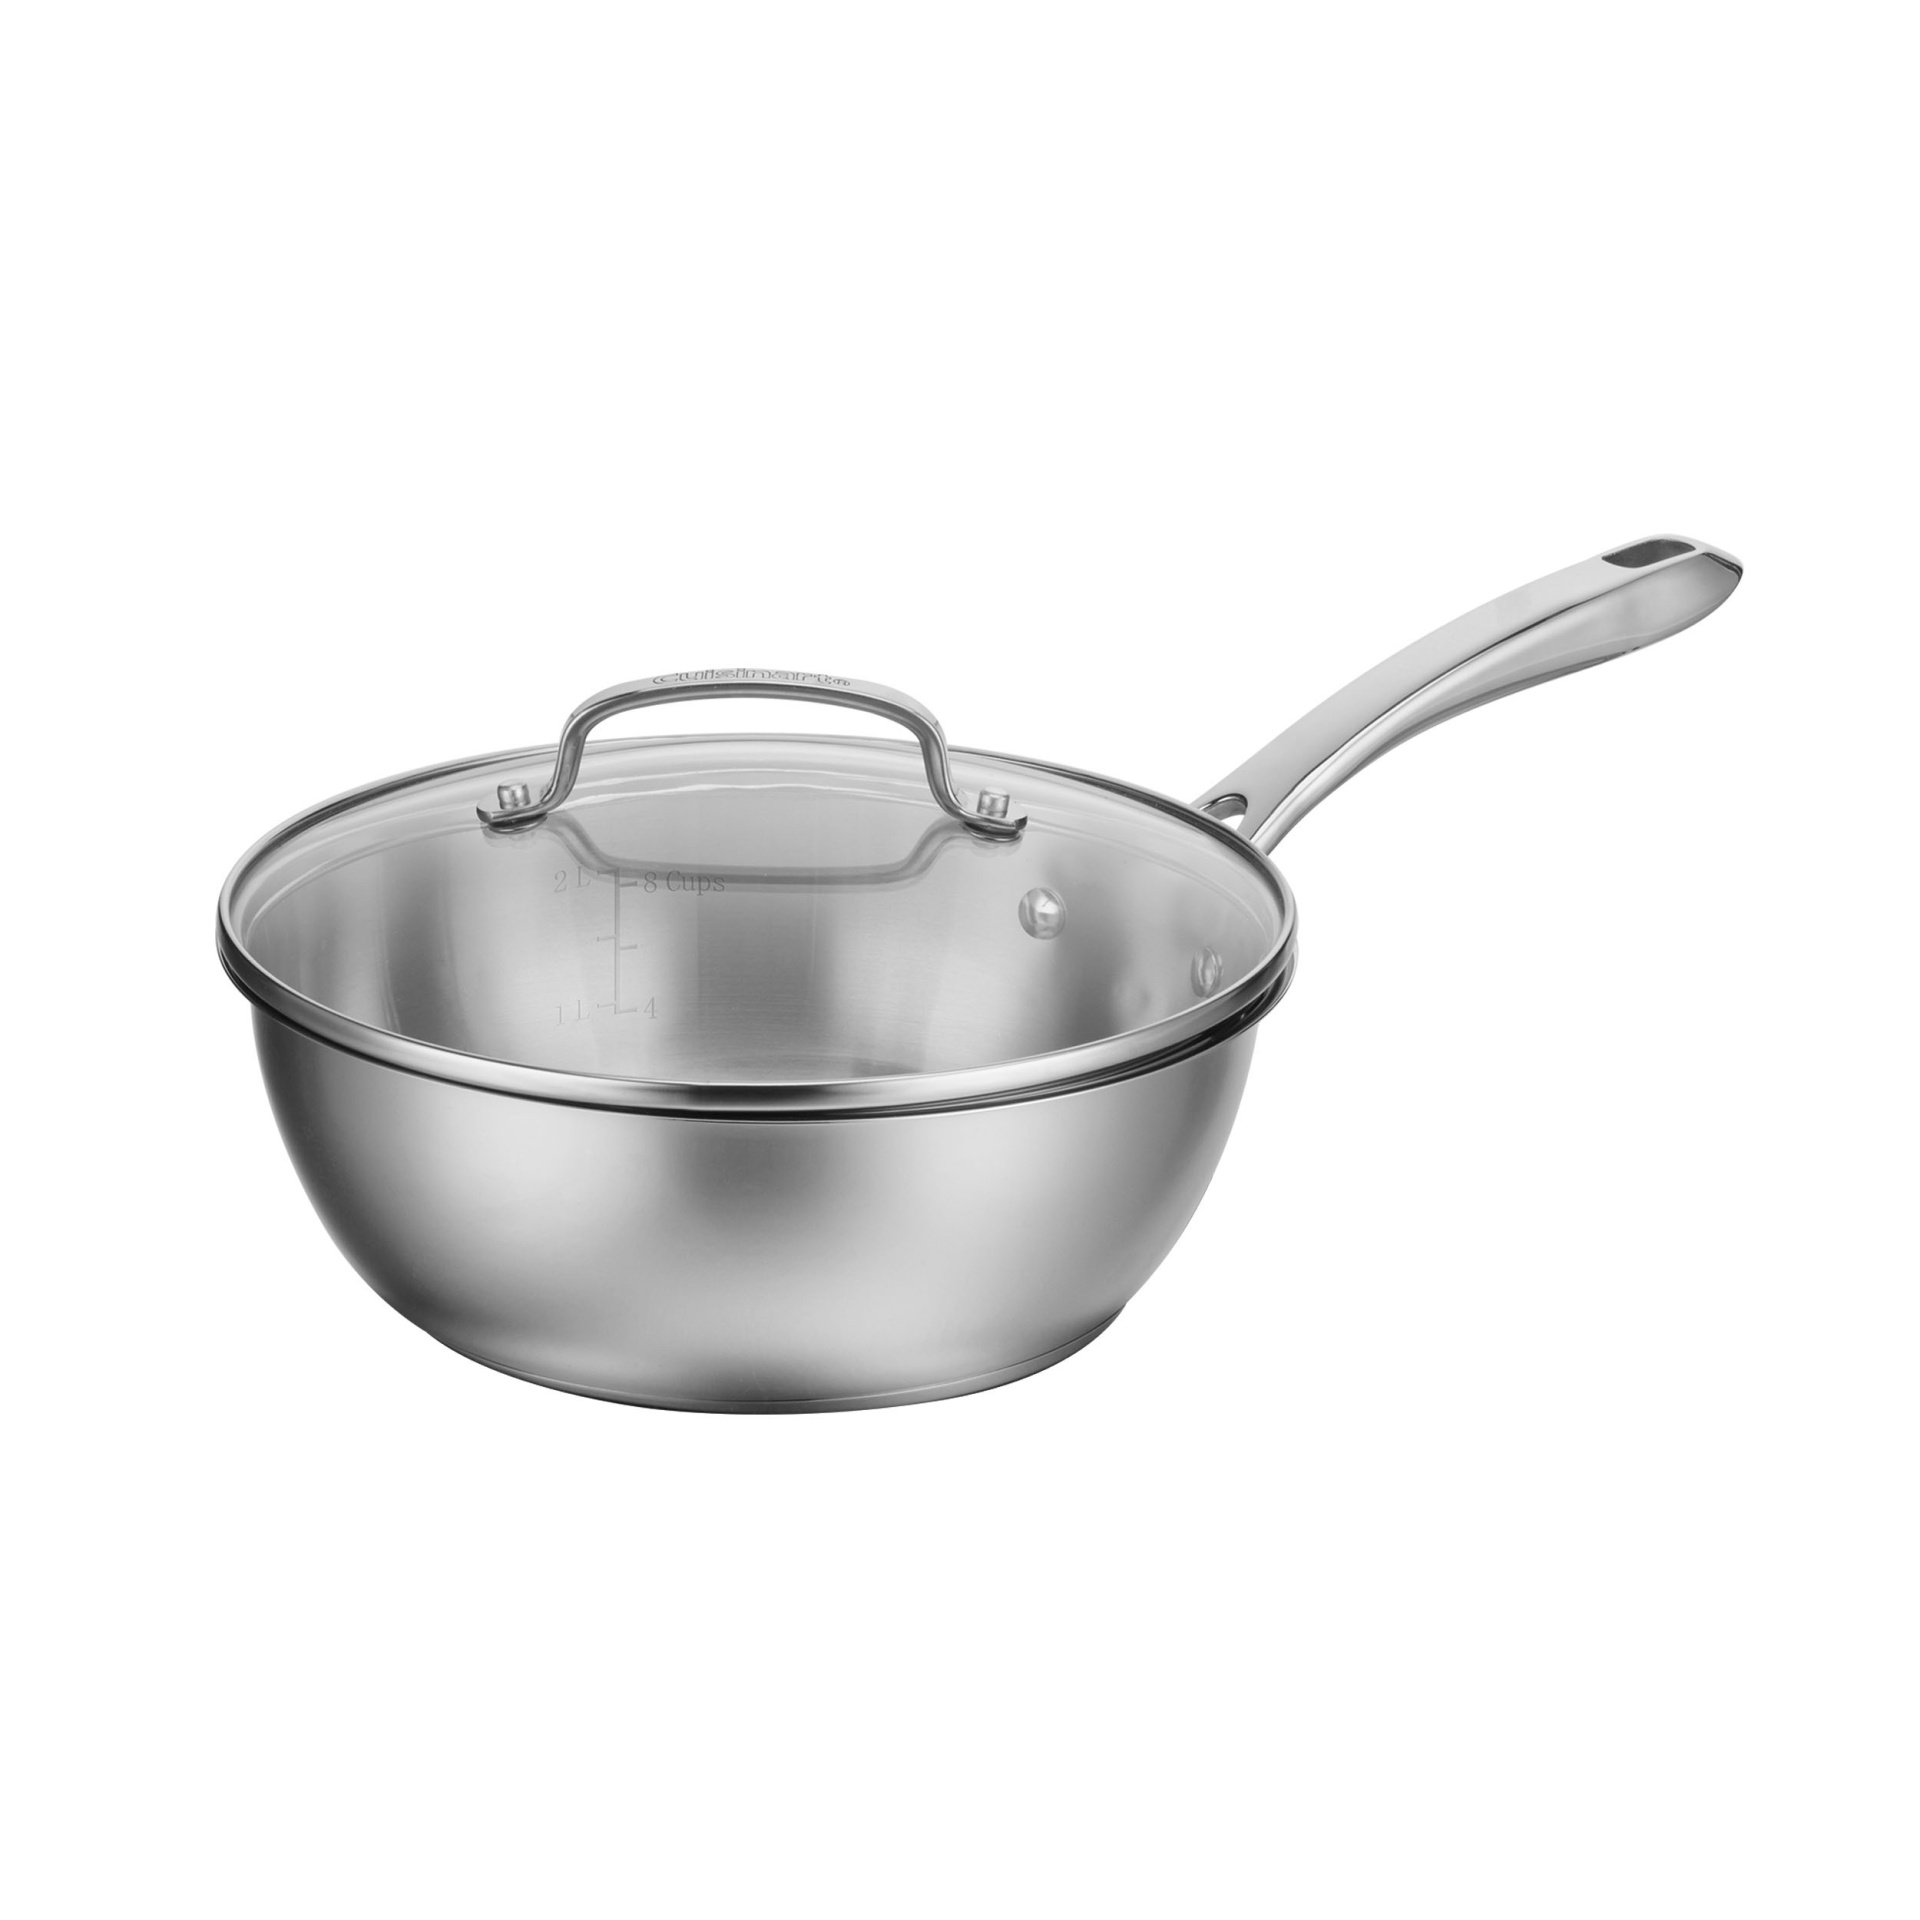 slide 1 of 4, Cuisinart Stainless Steel Chef's Pan with Cover - 8335-24, 3 qt